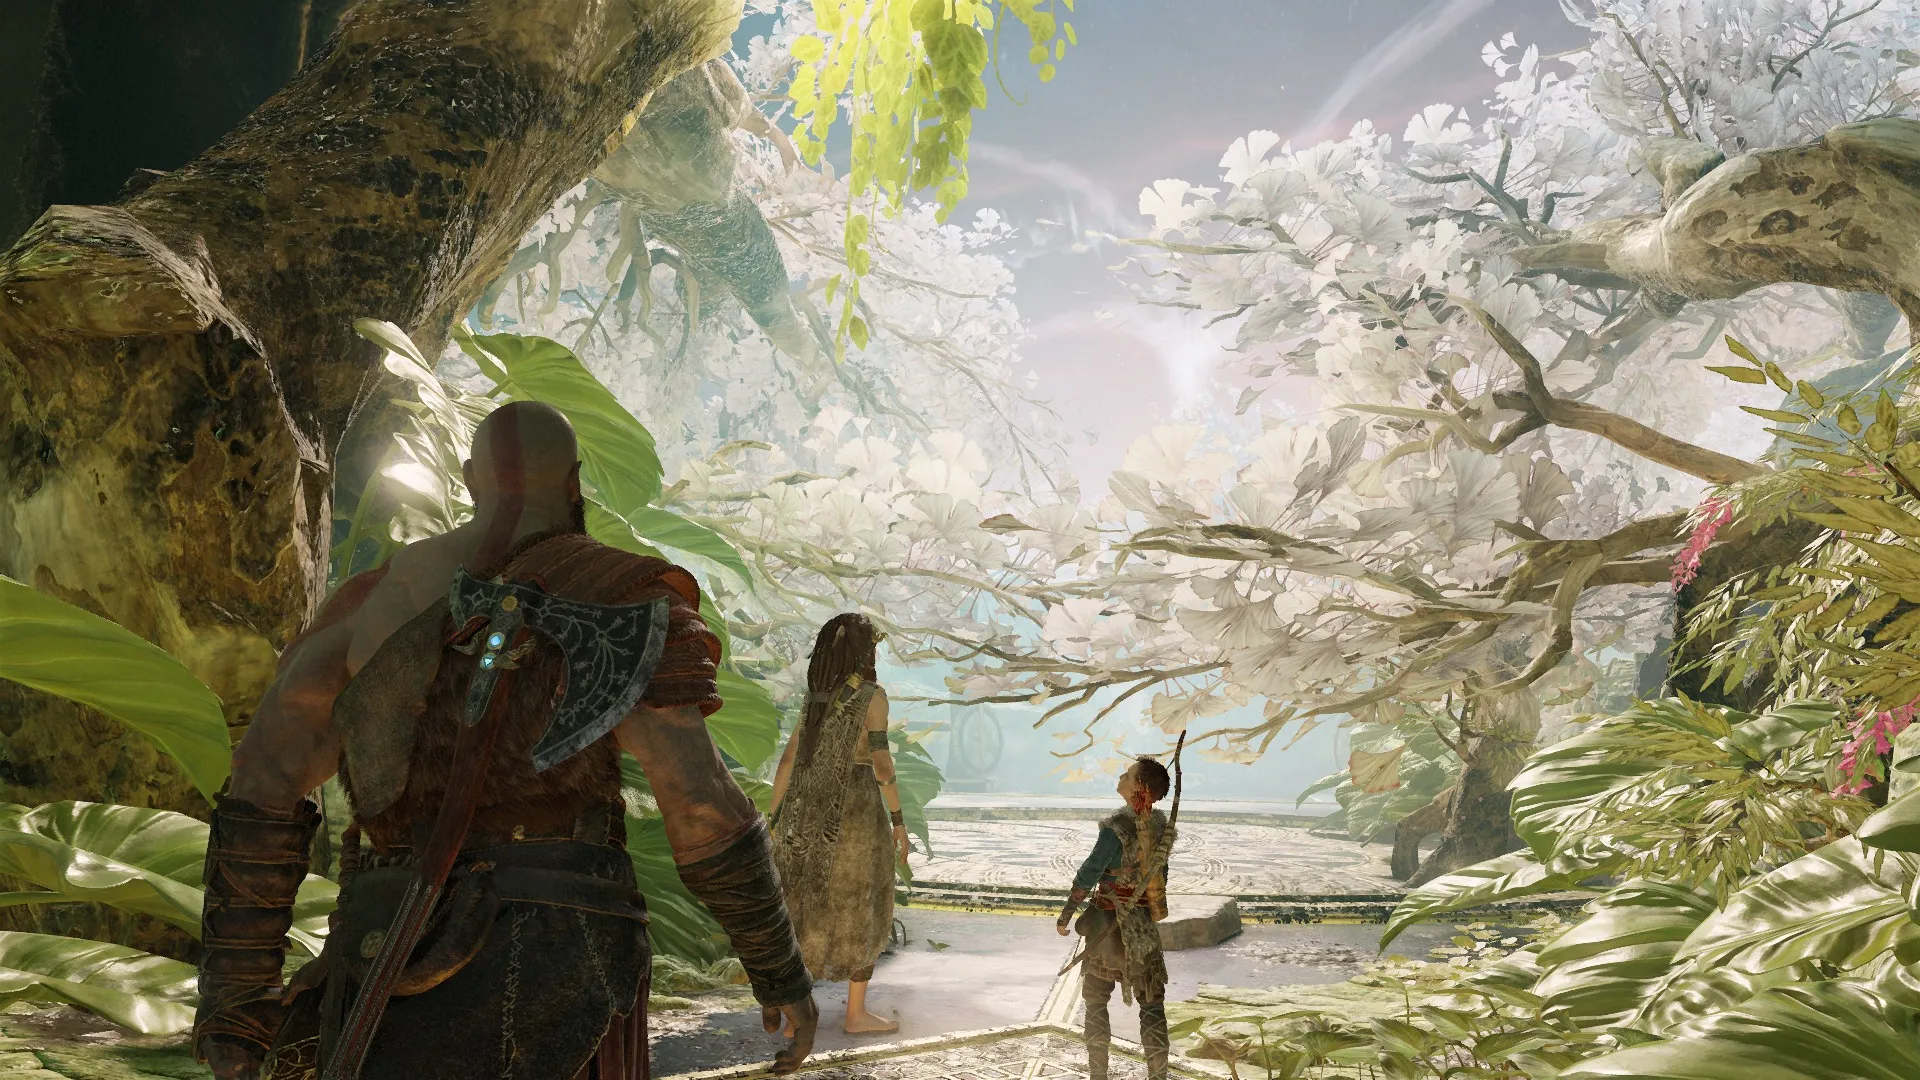 Review: God of War is Still Impressive on PC - Siliconera